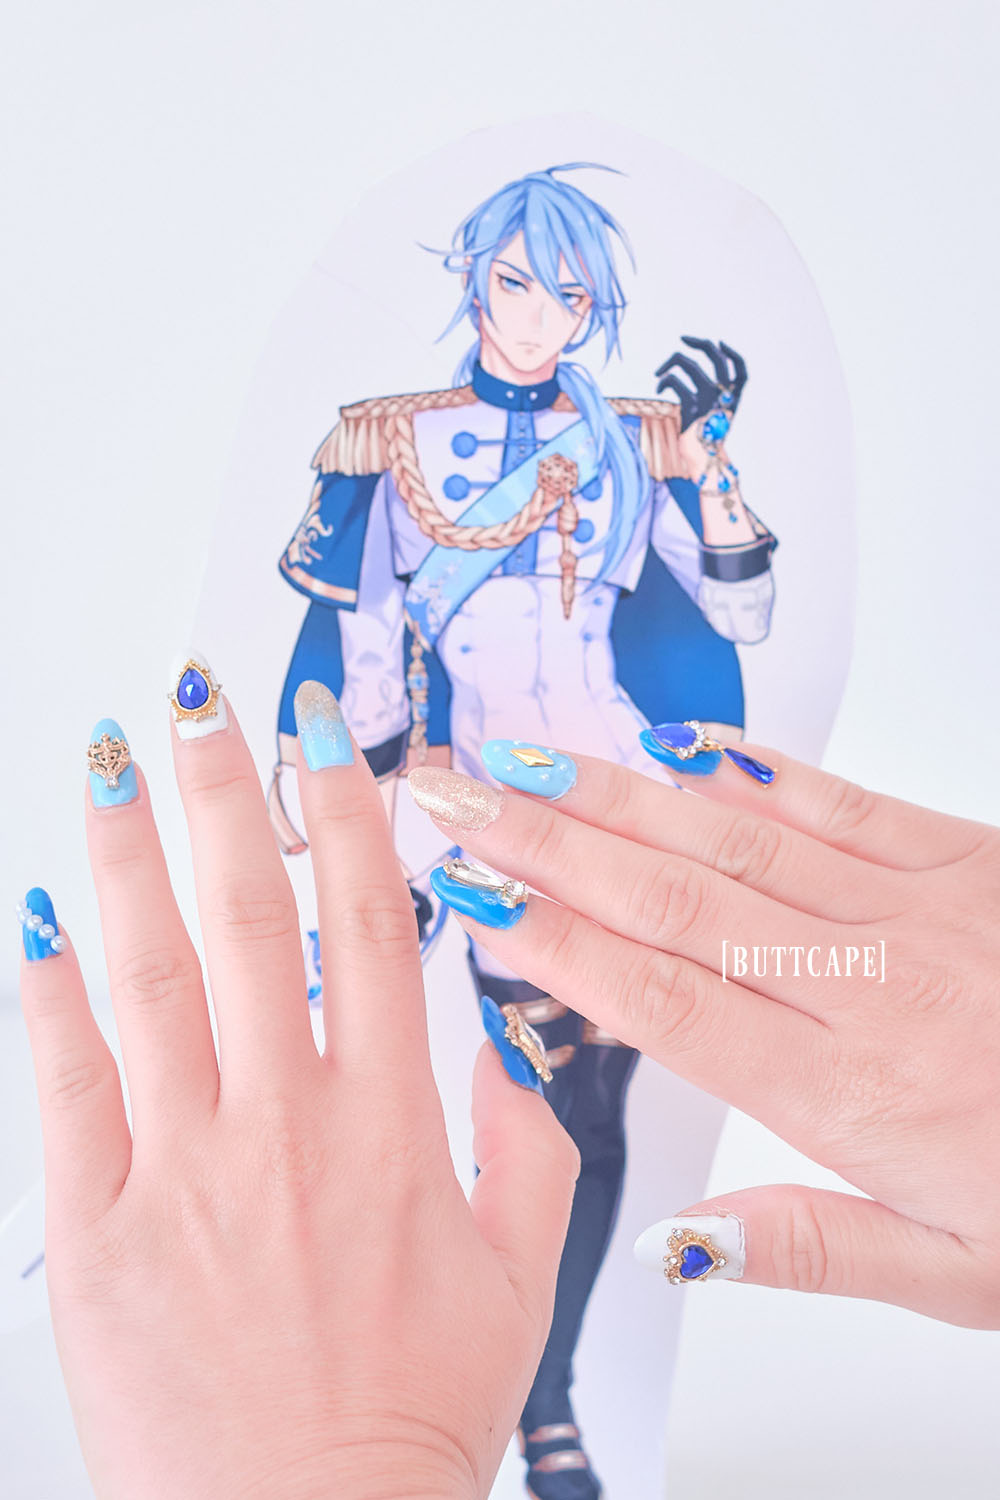 Two hands showing off nails in front of Nu:Carnival character Edmond.